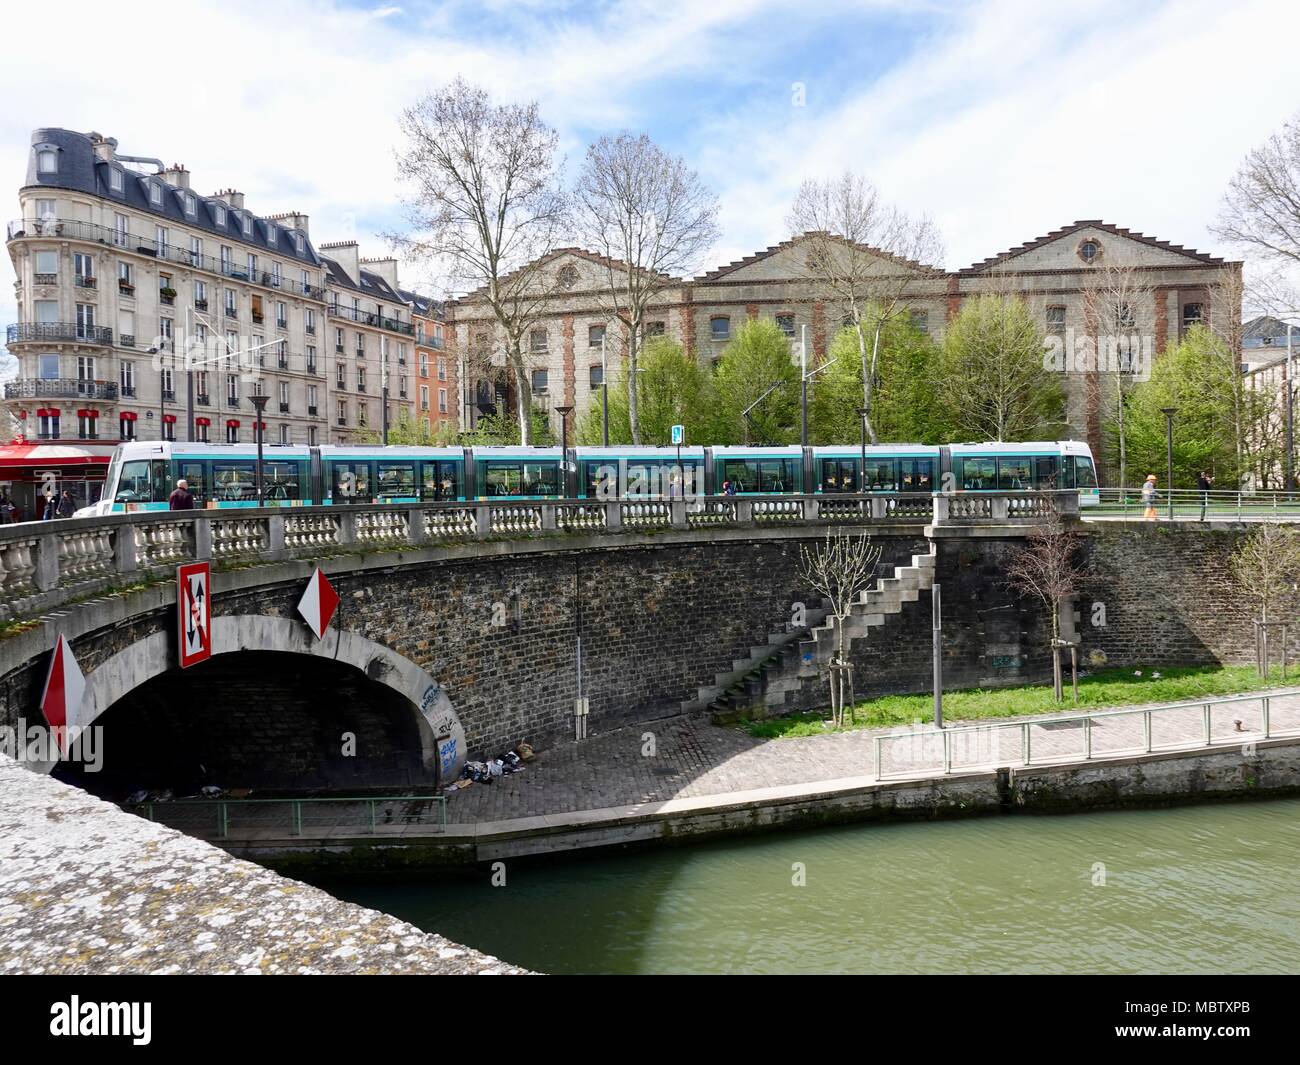 Tram with people, crossing over canal near Porte de la Villette with classic Parisian architecture in the background. Paris, France Stock Photo